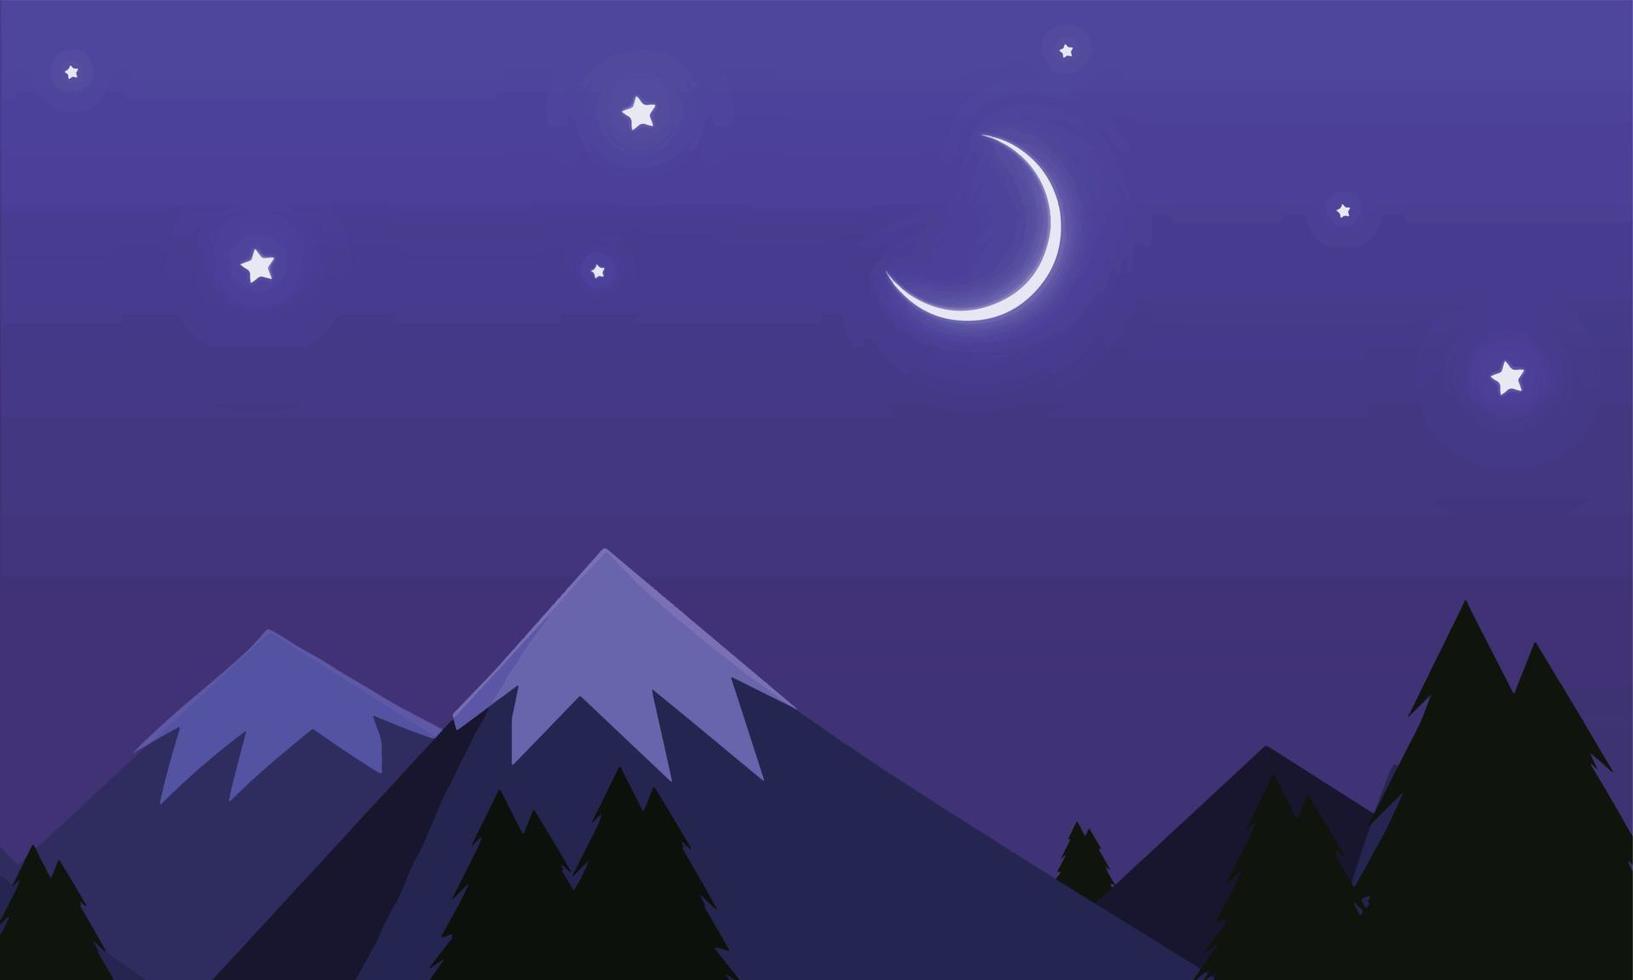 Mountains and trees silhouette with a dark blue night sky vector